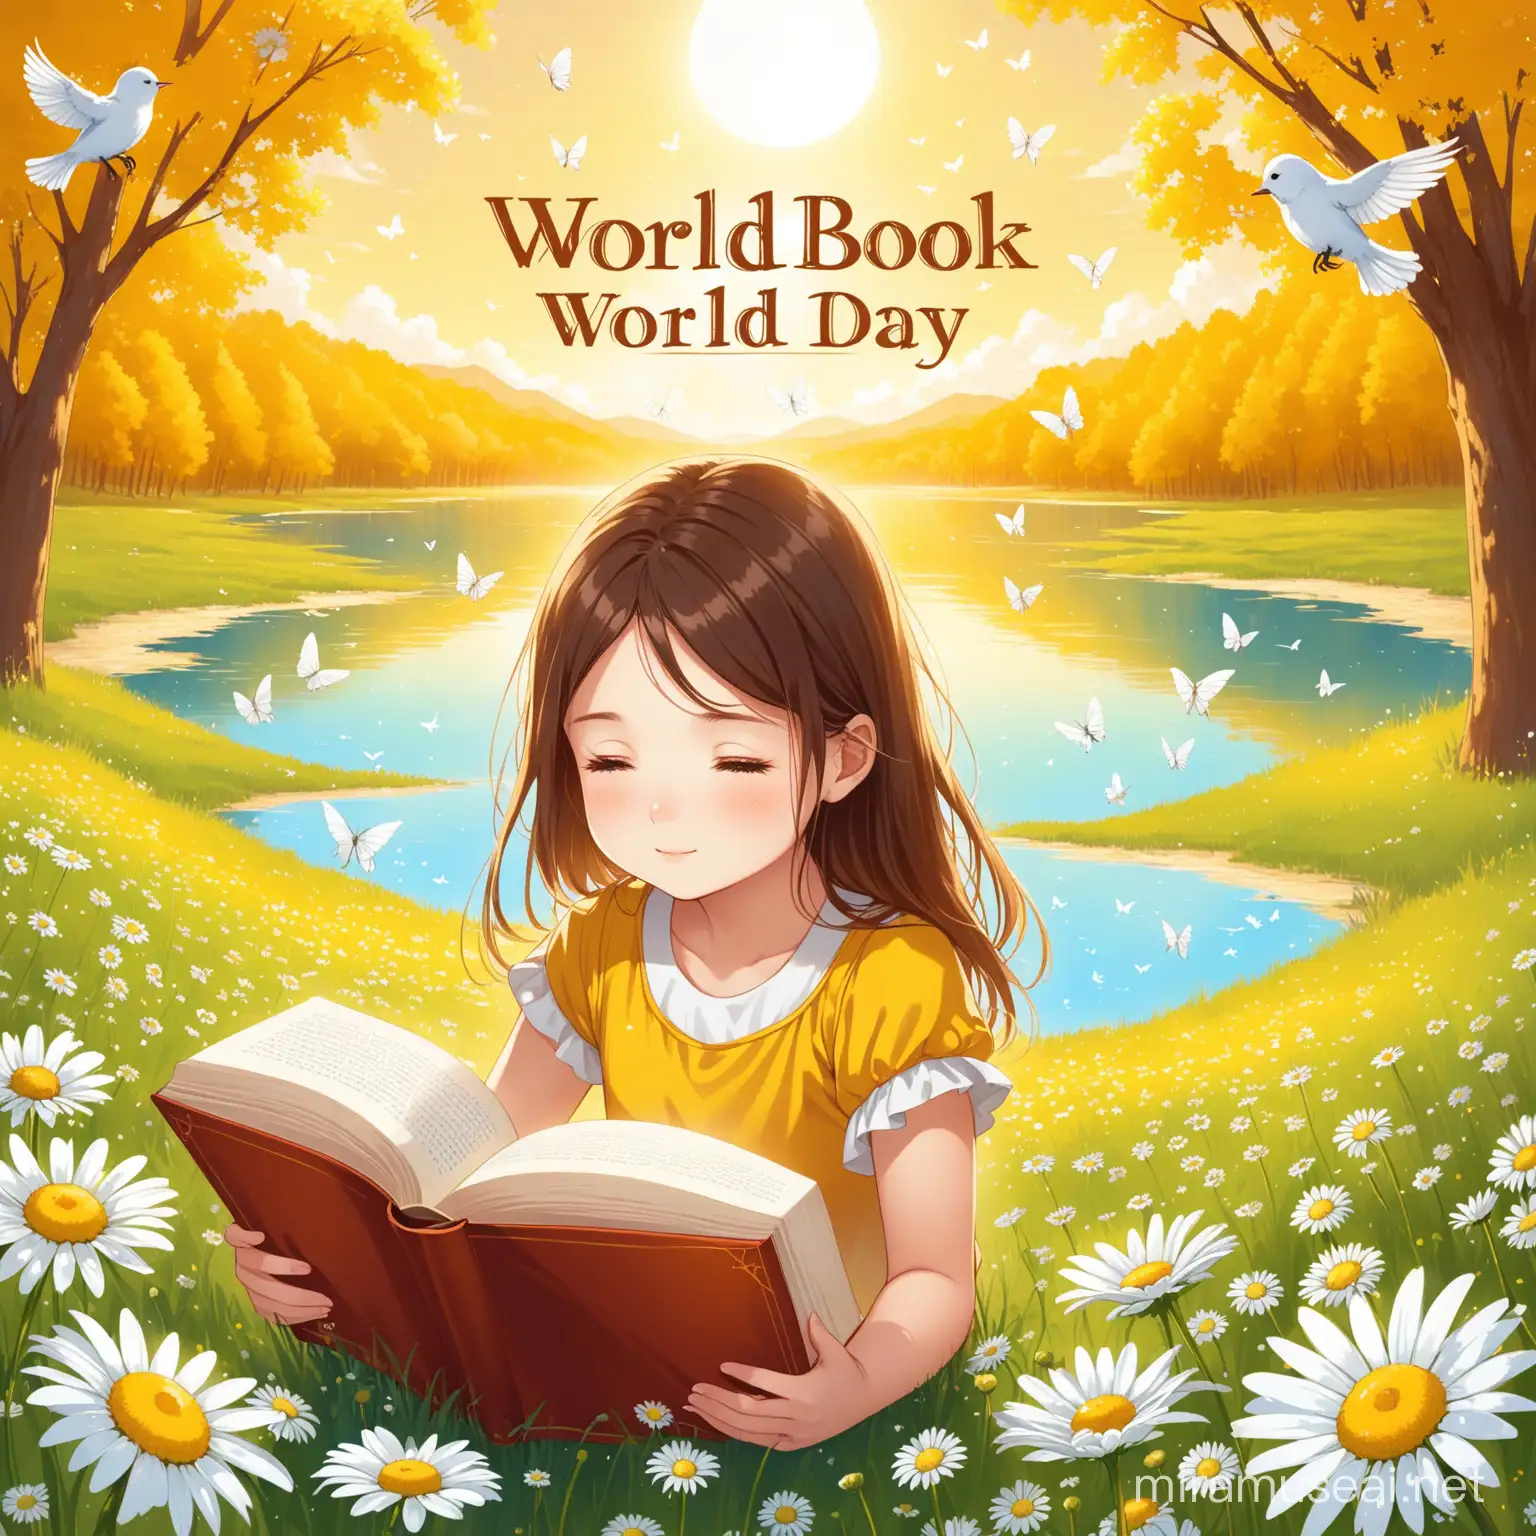 Young Girl Reading by Yellow Lake Childhood Scene with Chamomile Flowers and World Book Day